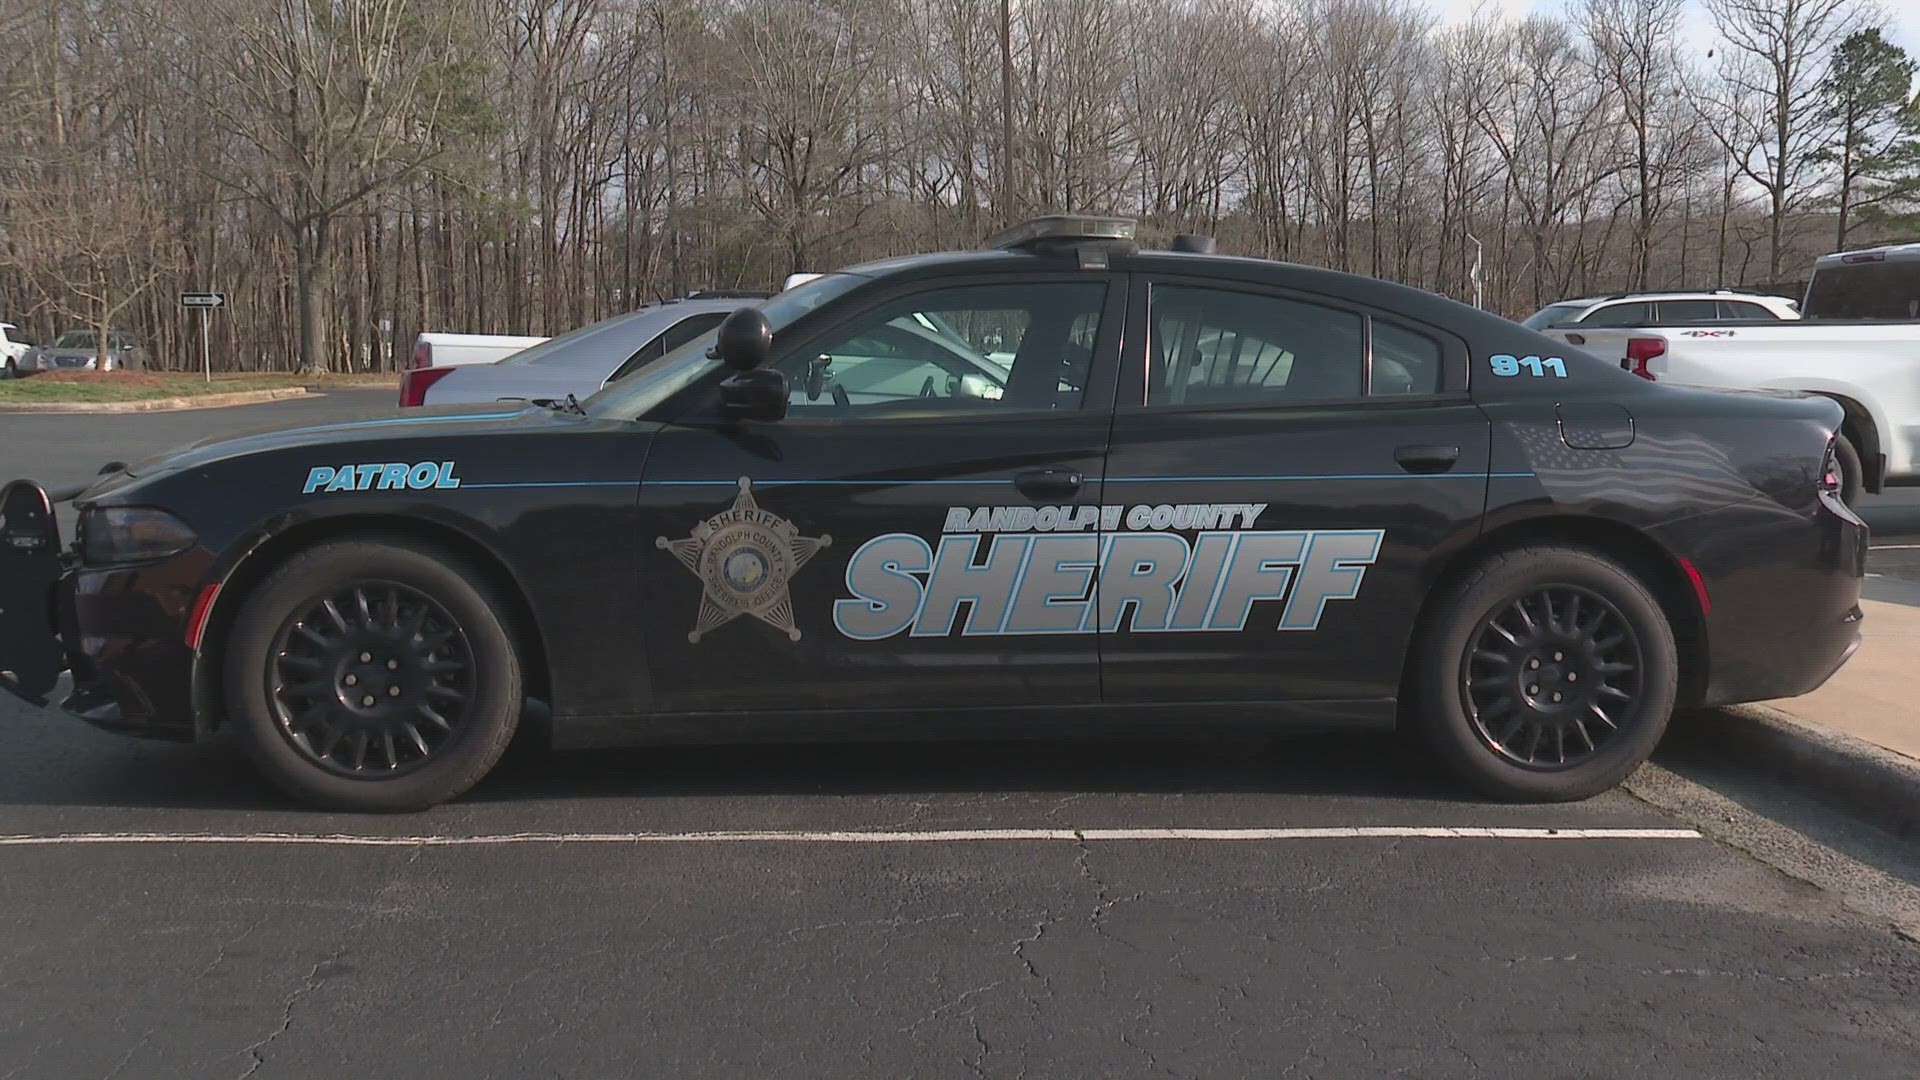 A new program through the Randolph County Sheriff’s Department is helping provide peace of mind.